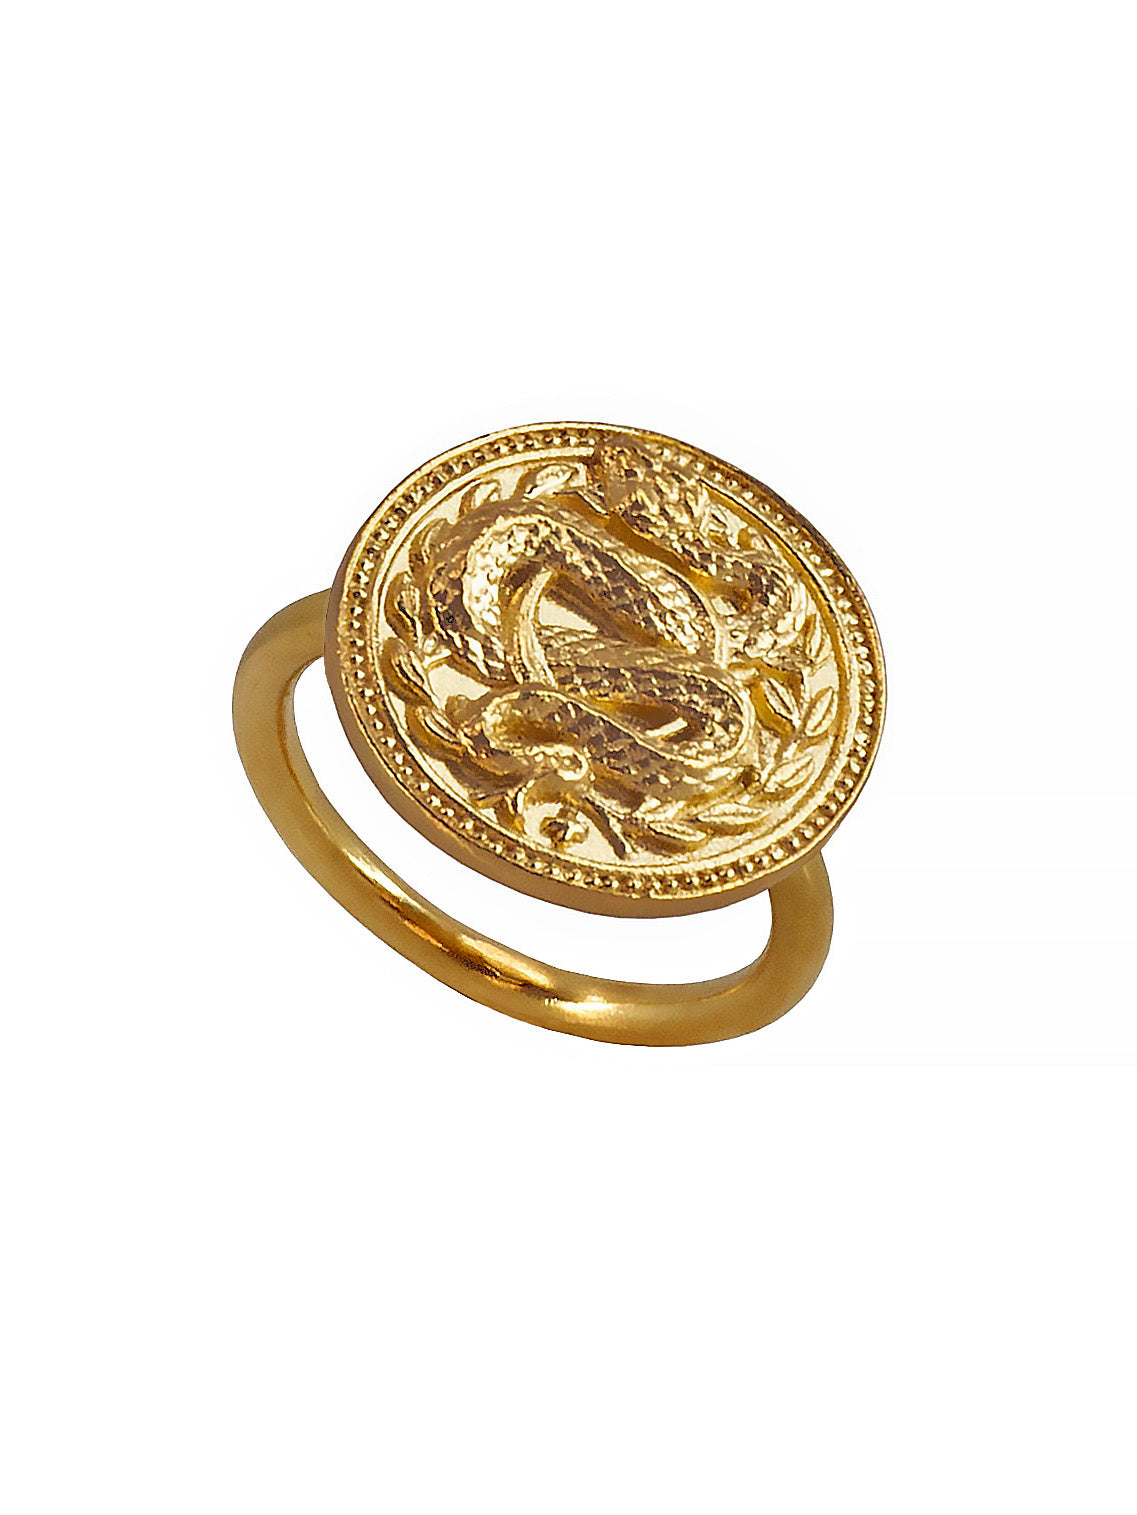 Blood type O Positive Ring. 23ct Gold plated Sterling Silver.Grupo sanguineo Anillo, Dorado